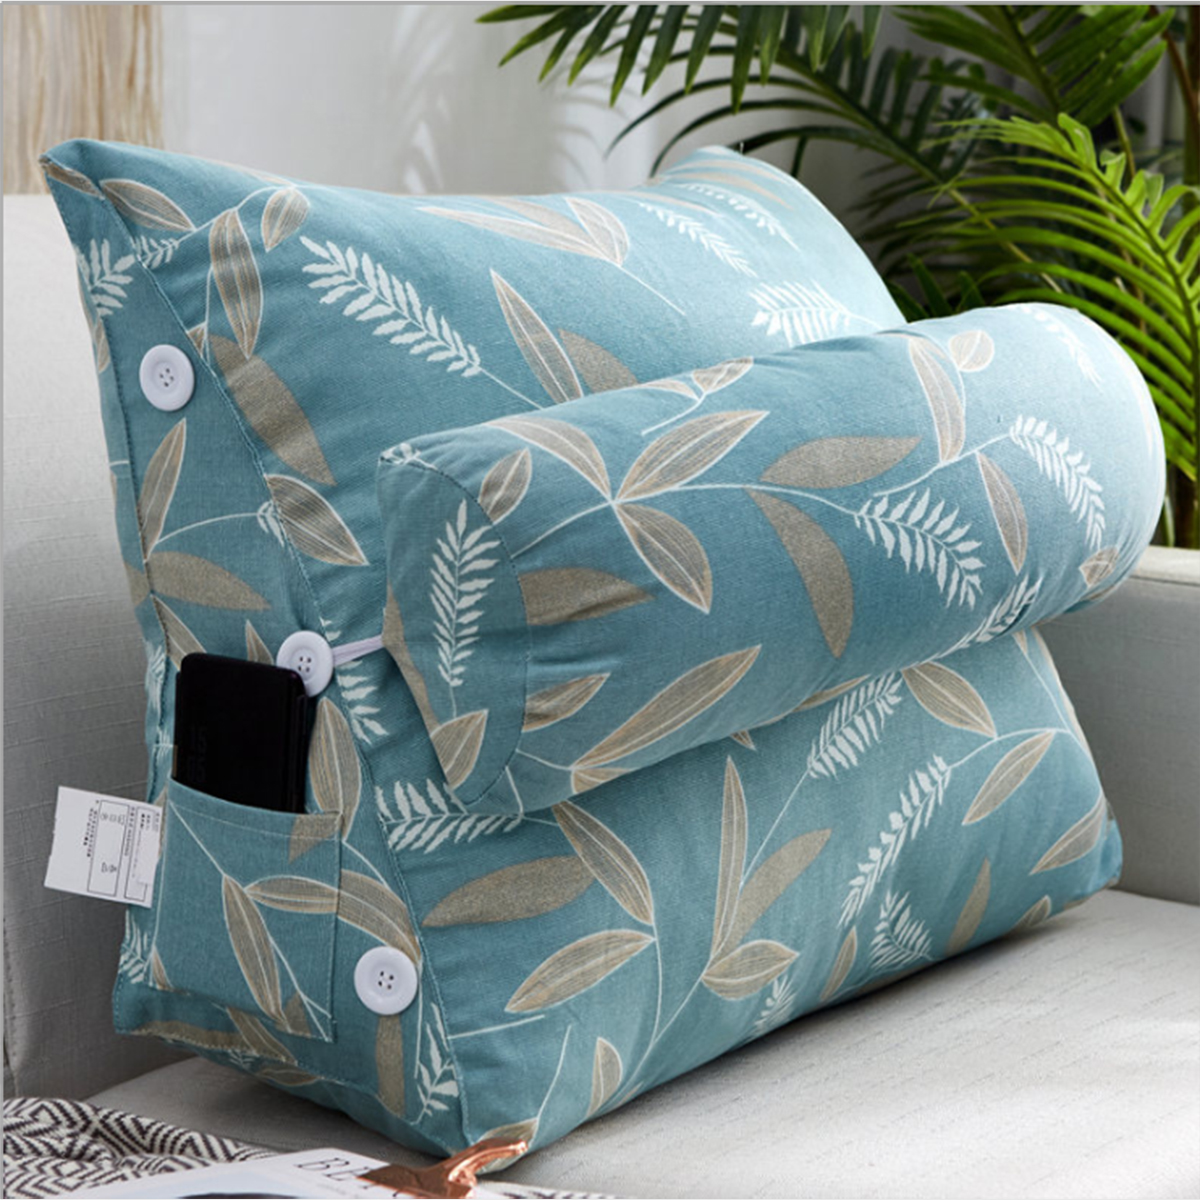 605022CM-Triangle-Cushion-Waist-Cushion-Rest-Pillow-Simple-Ins-Style-Removable-And-Washable-With-Hea-1695482-3